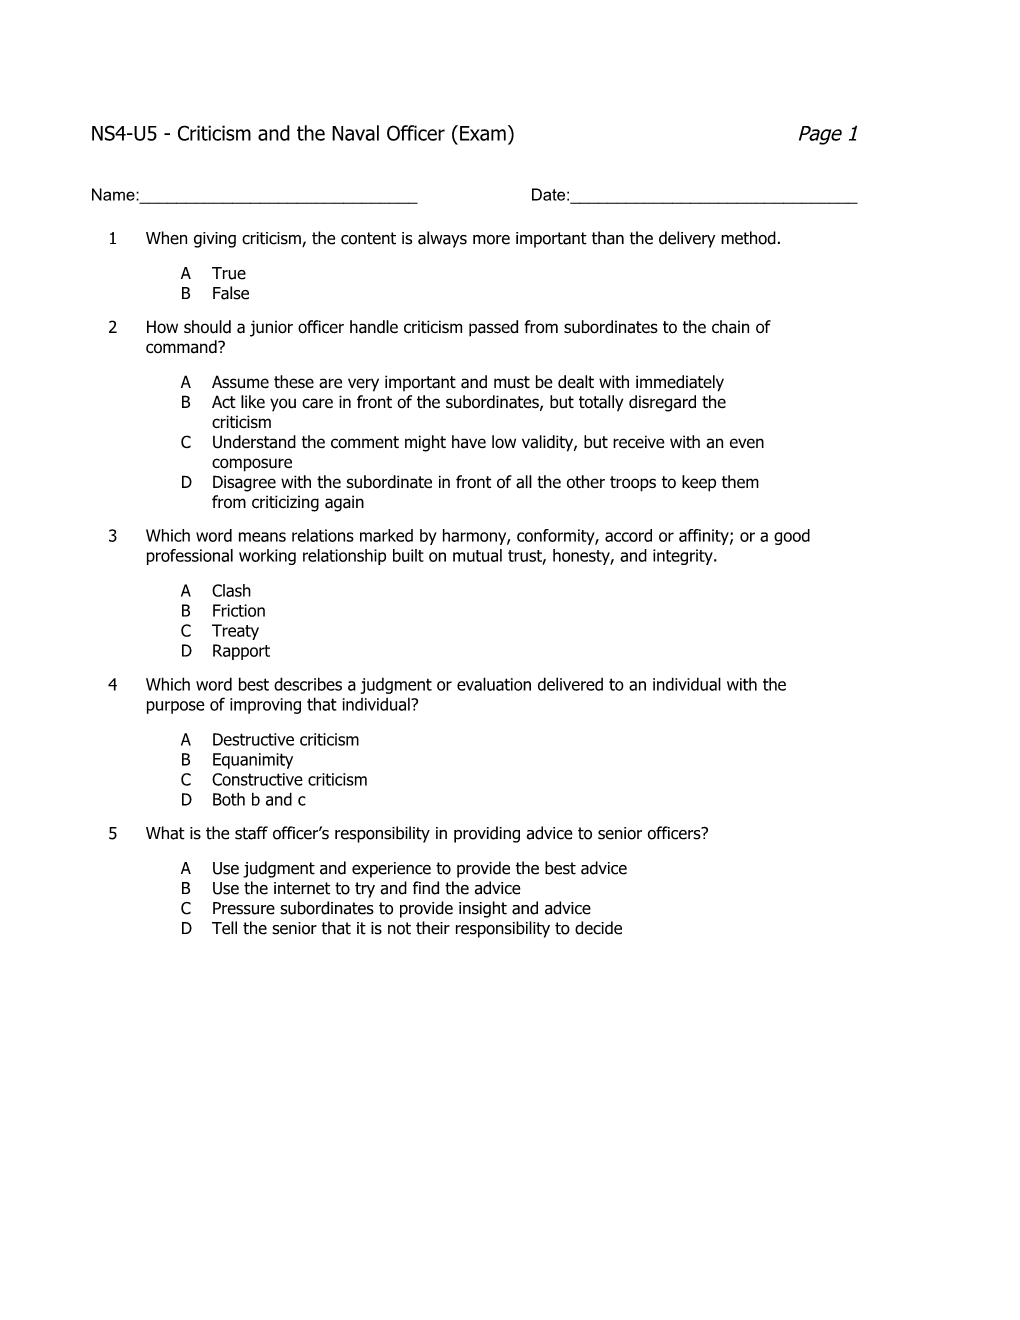 NS4-U5 - Criticism and the Naval Officer (Exam)Page 1